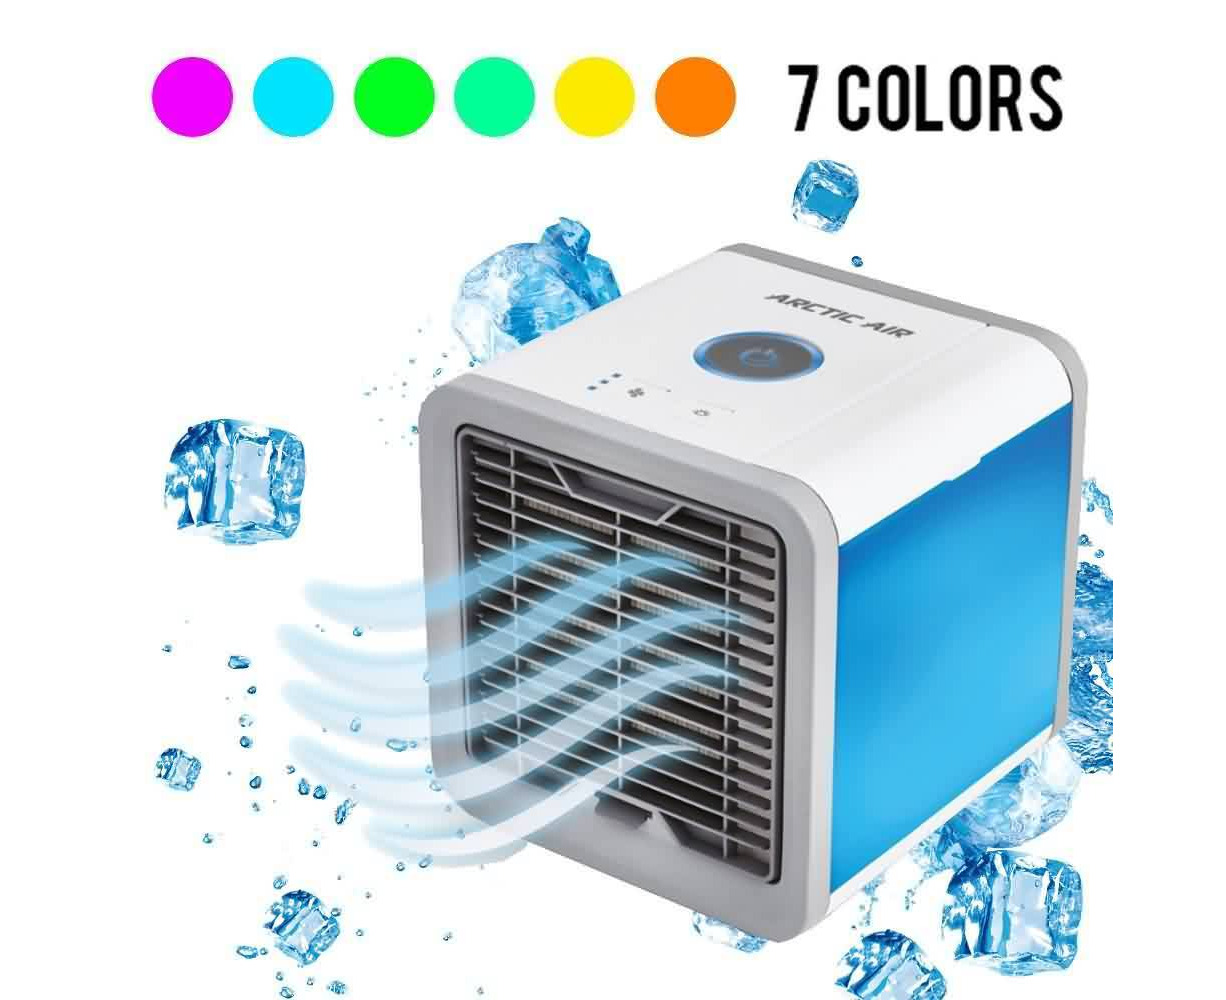 Mini USB Portable Air Conditioner Conditioning Humidifier Purifier Air Cooler Personal Space Cooling Fan for Office Home Car Rechargeable Mini Cooling Desktop Fan with LED Light 